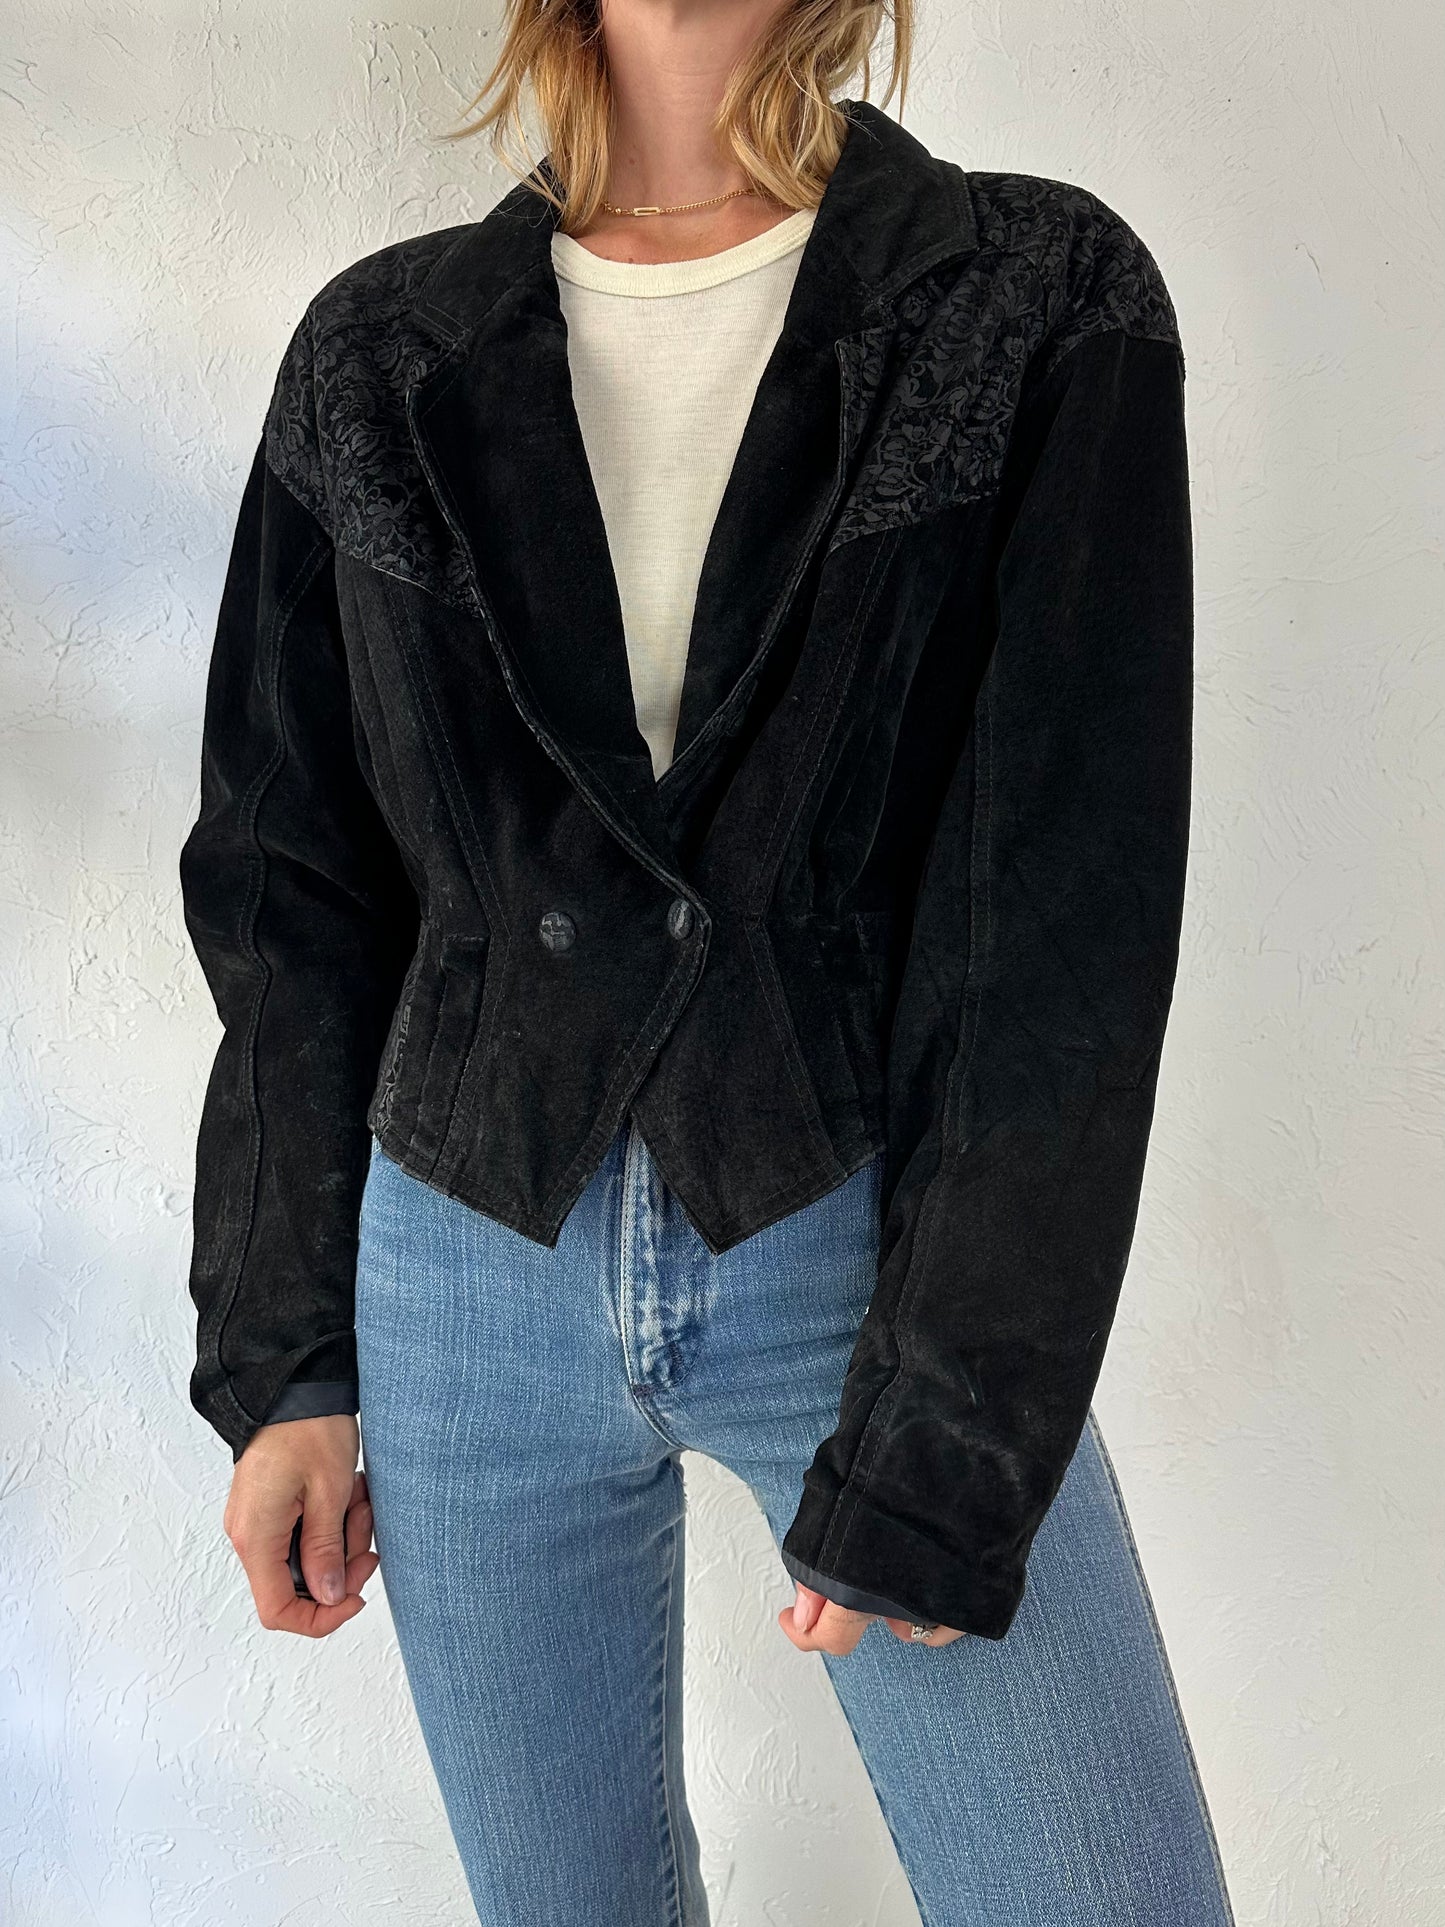 80s 'Chia' Black Embossed Suede Leather Jacket / Small - Medium